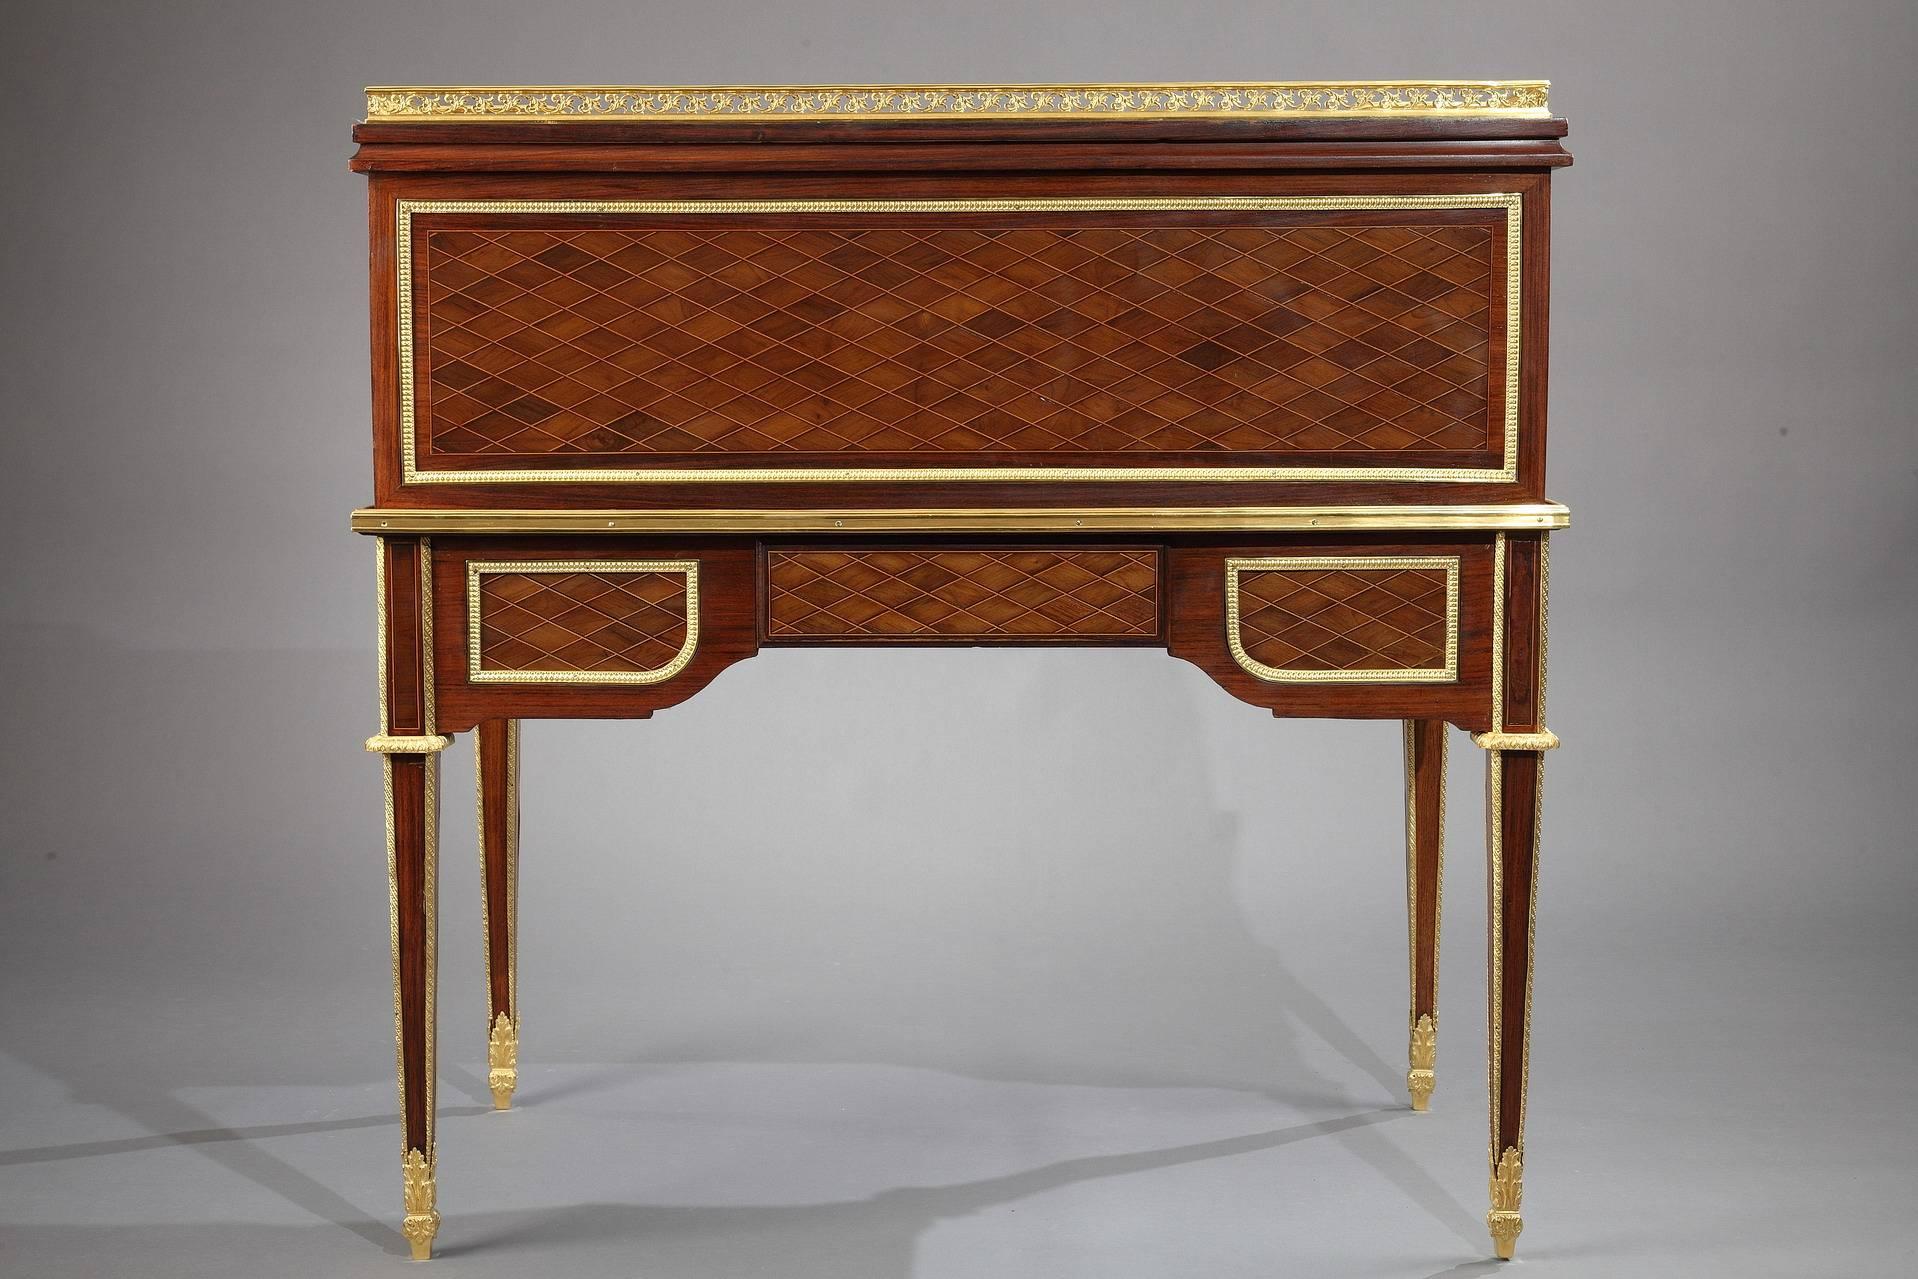 Bronze Marquetry Rolltop Desk after One Commissioned by Marie-Antoinette to Riesener